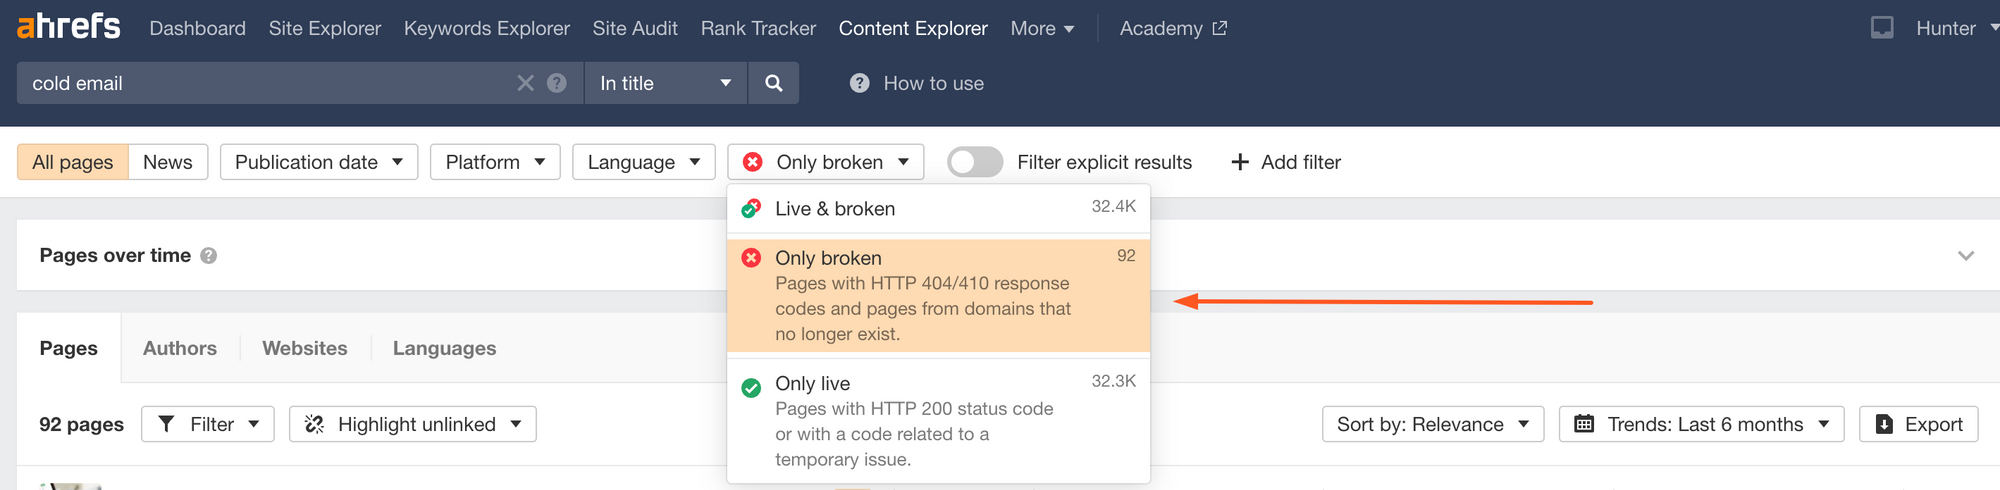 Filtering for broken pages in Ahrefs' Content Explorer tool